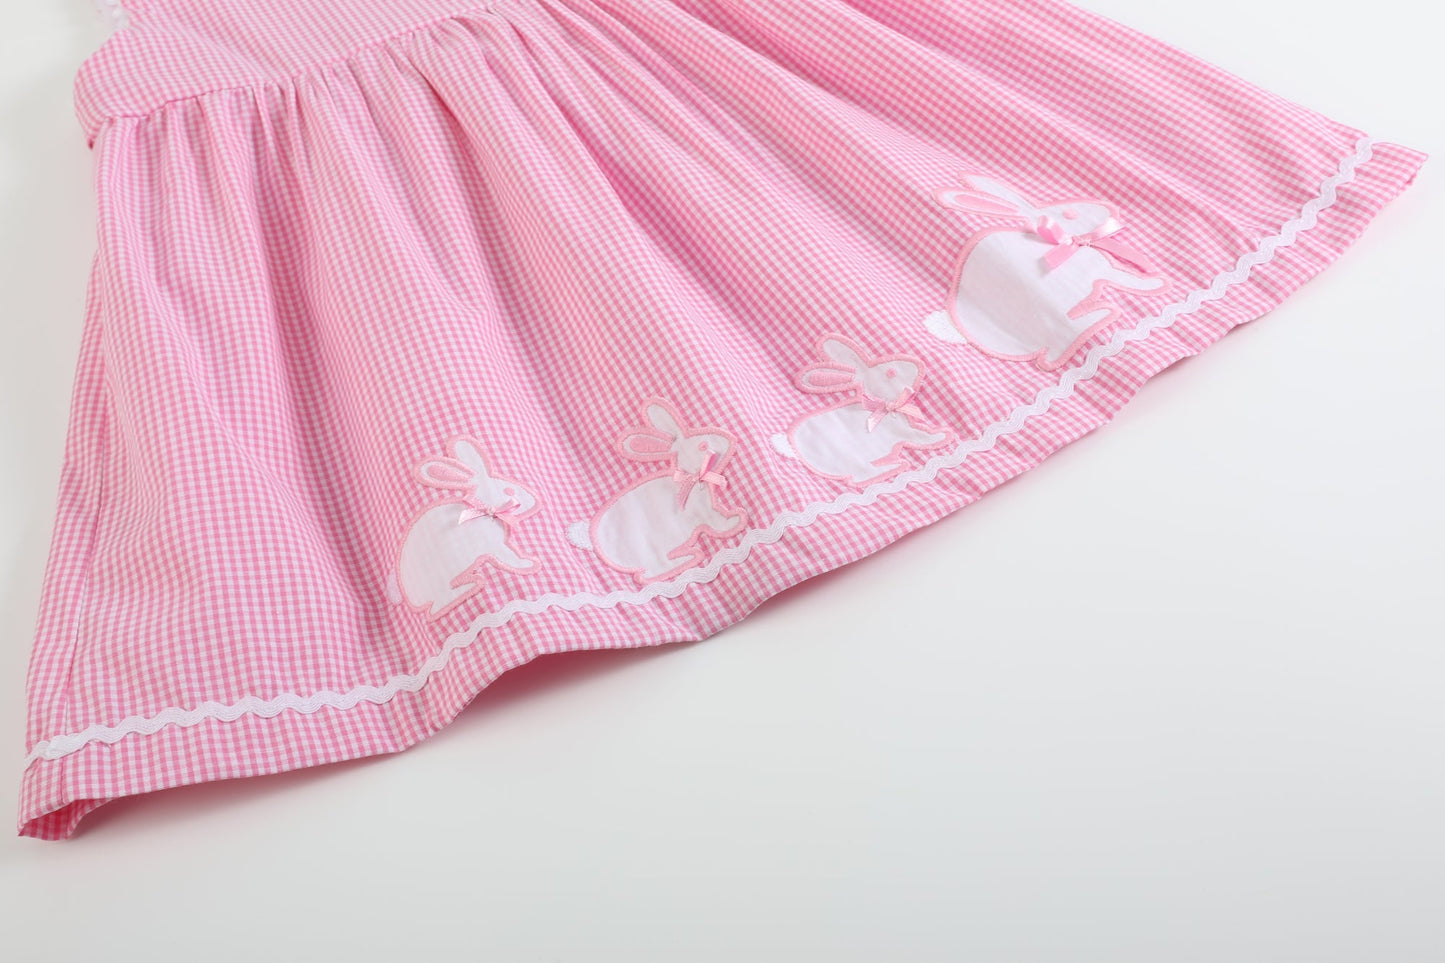 Girls’ Pink Gingham Bunny Family Button Dress